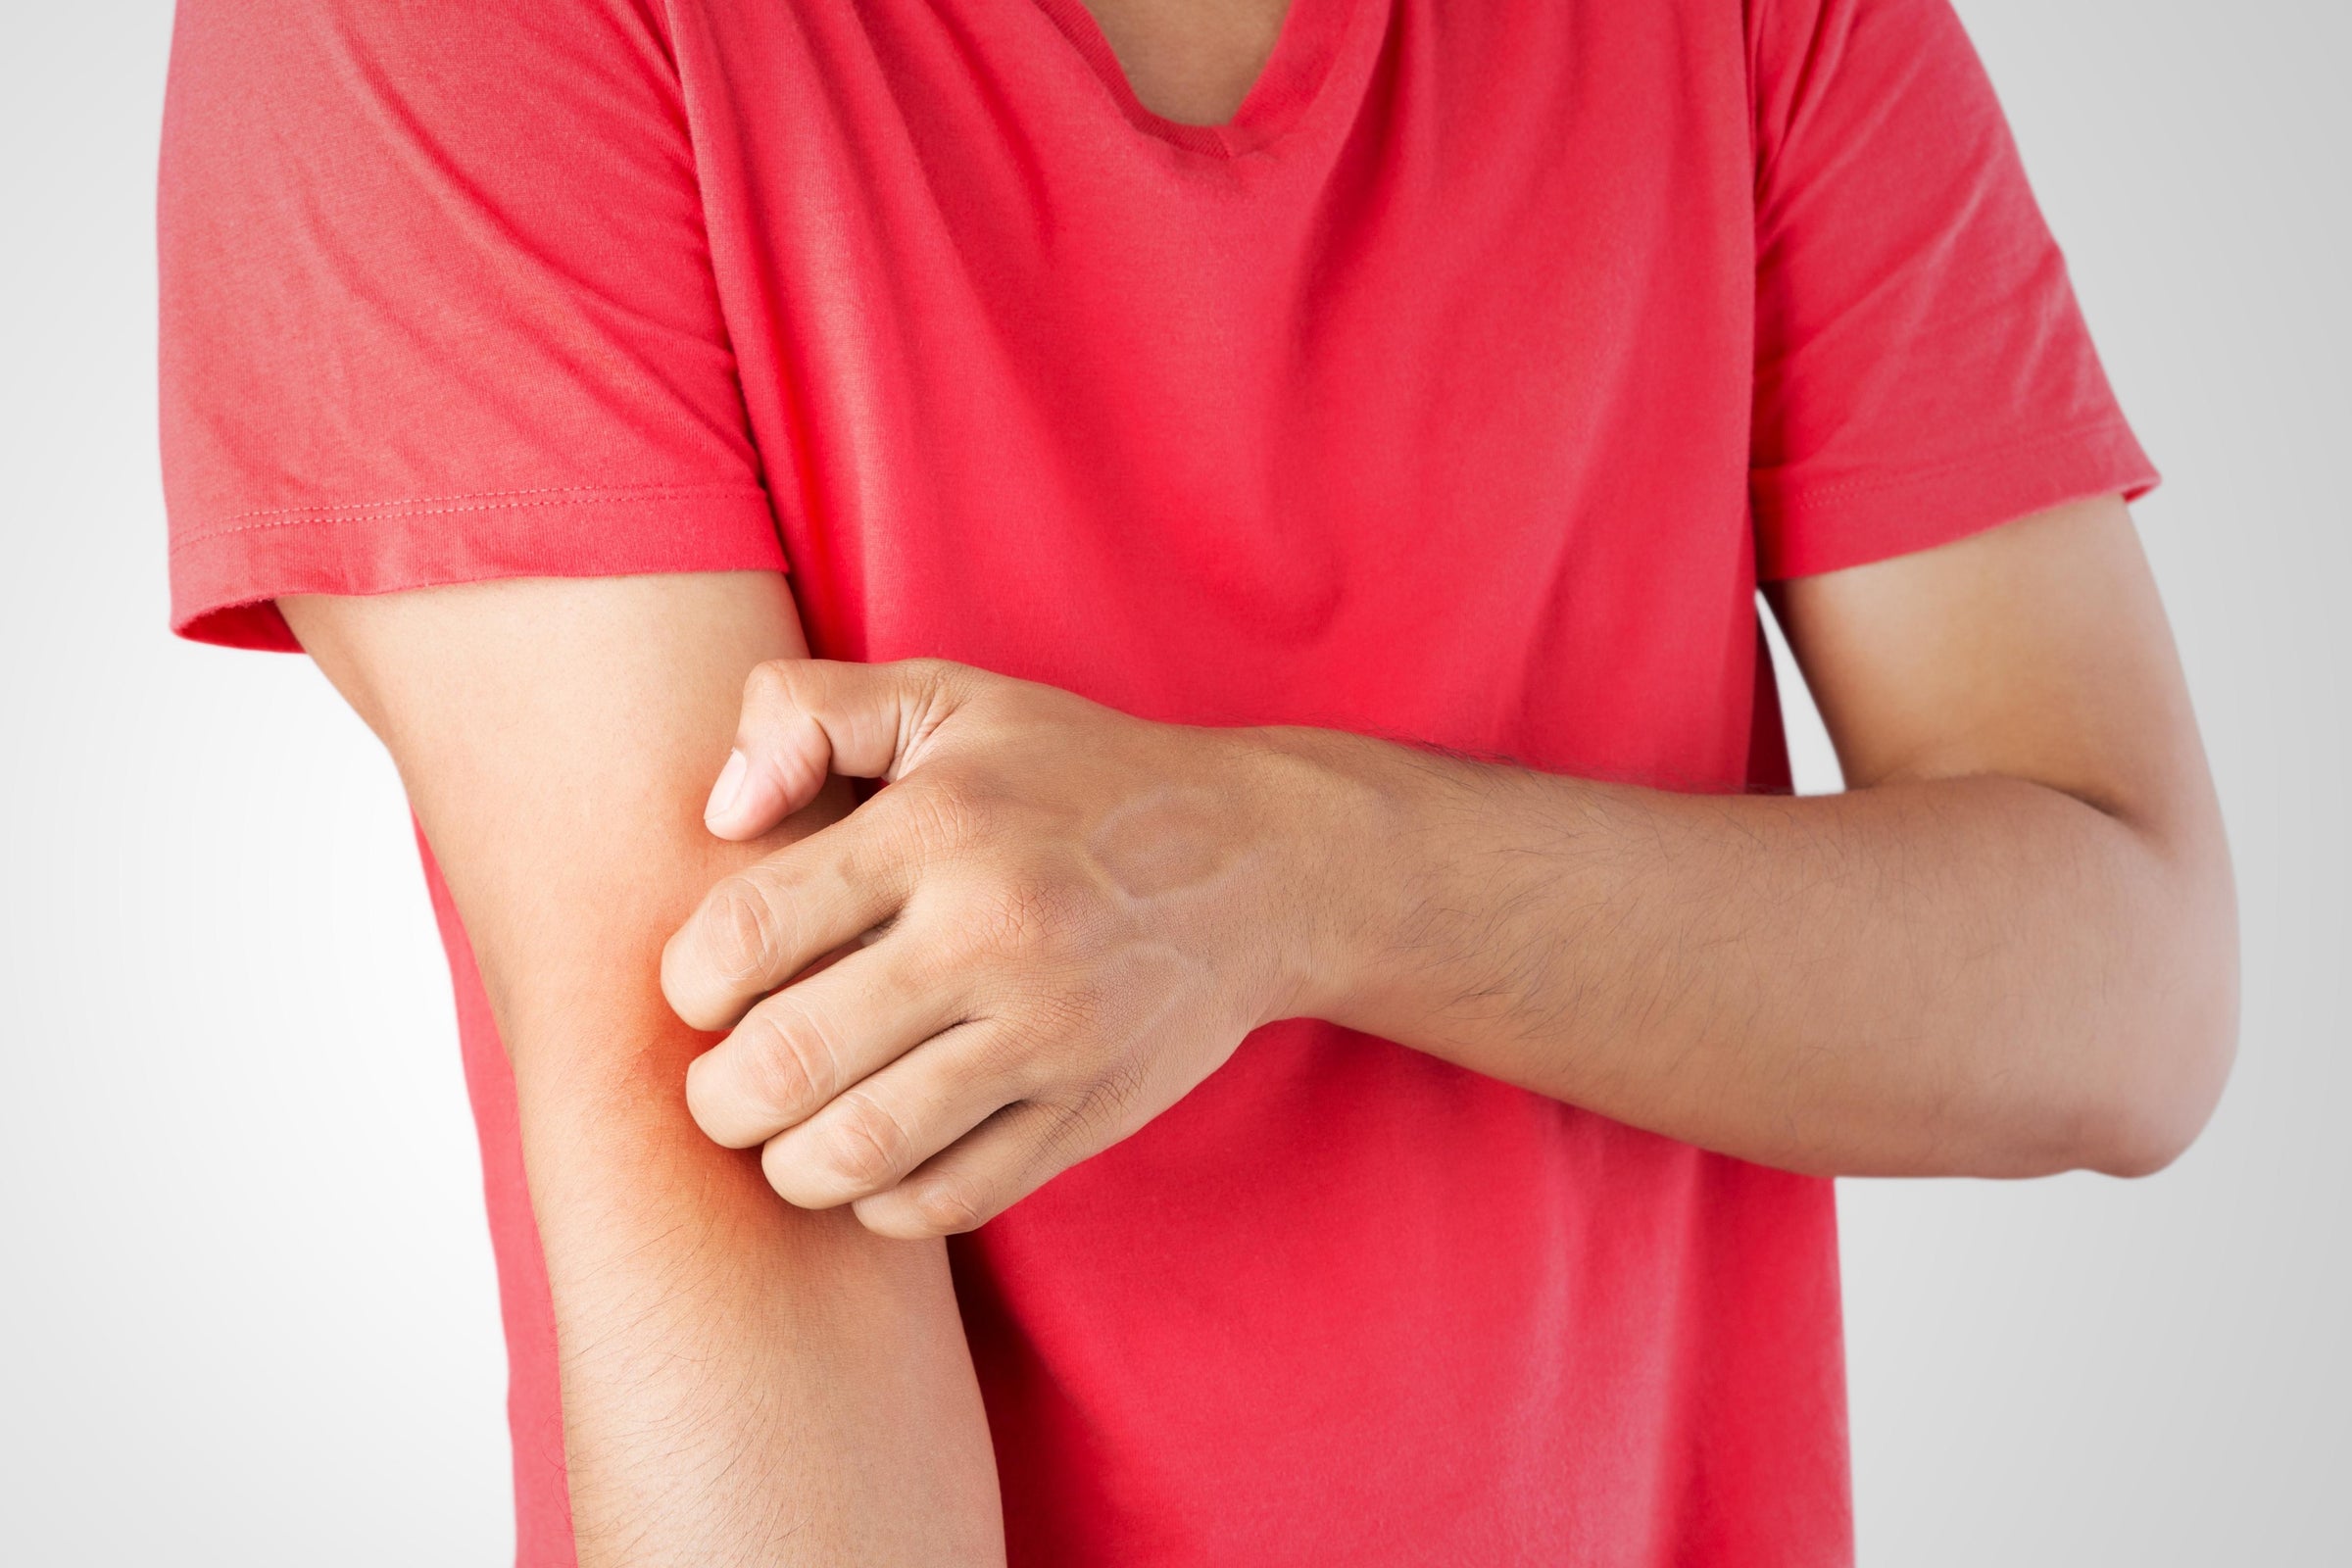 Man wondering, “Why do healing wounds itch?” while scratching his arm